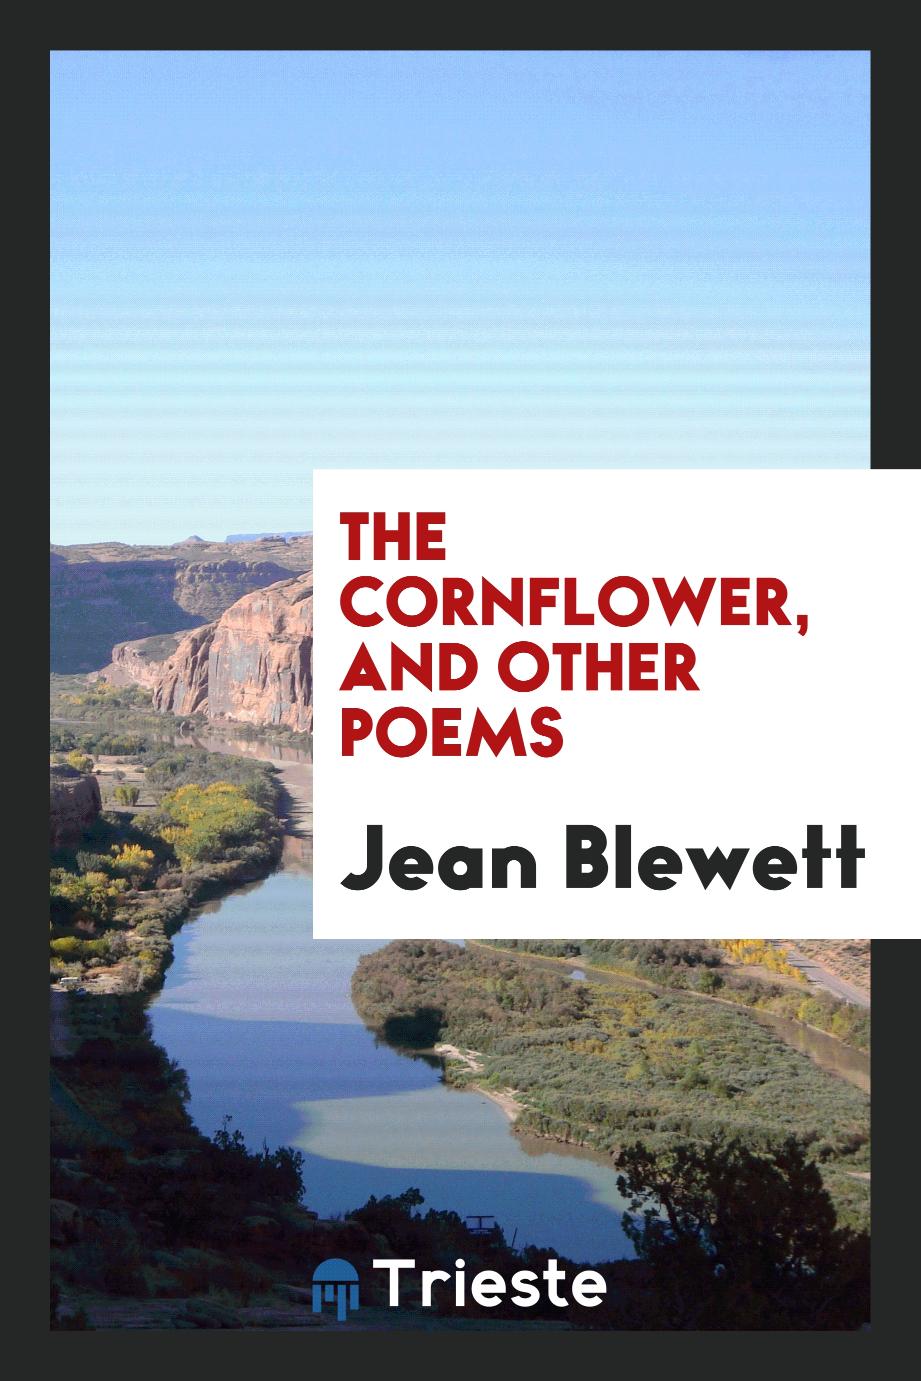 The cornflower, and other poems